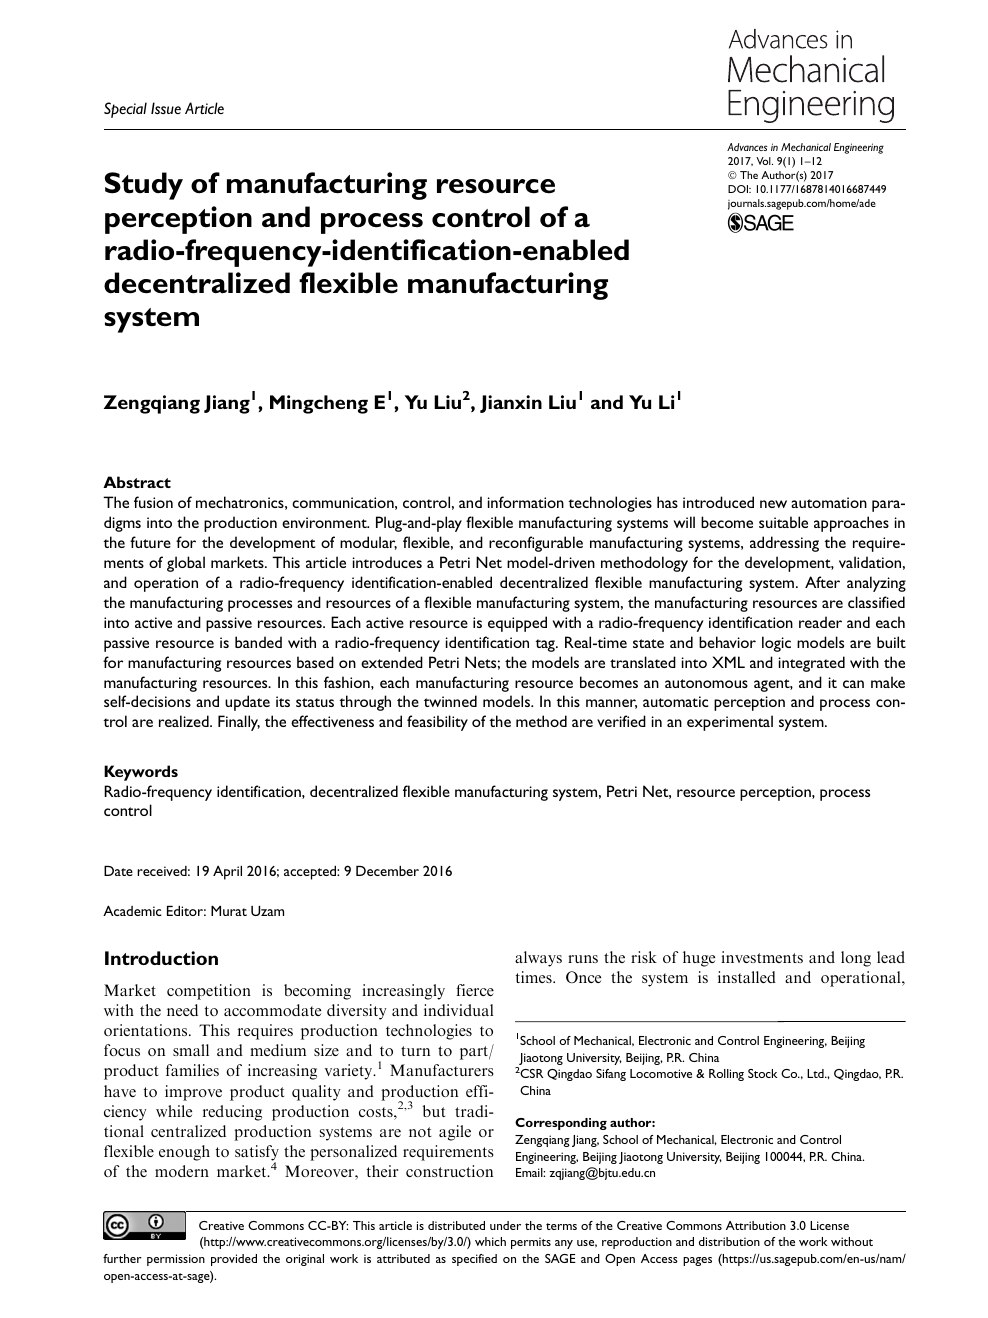 Study Of Manufacturing Resource Perception And Process Control Of A Radio Frequency Identification Enabled Decentralized Flexible Manufacturing System Topic Of Research Paper In Mechanical Engineering Download Scholarly Article Pdf And Read For Free On